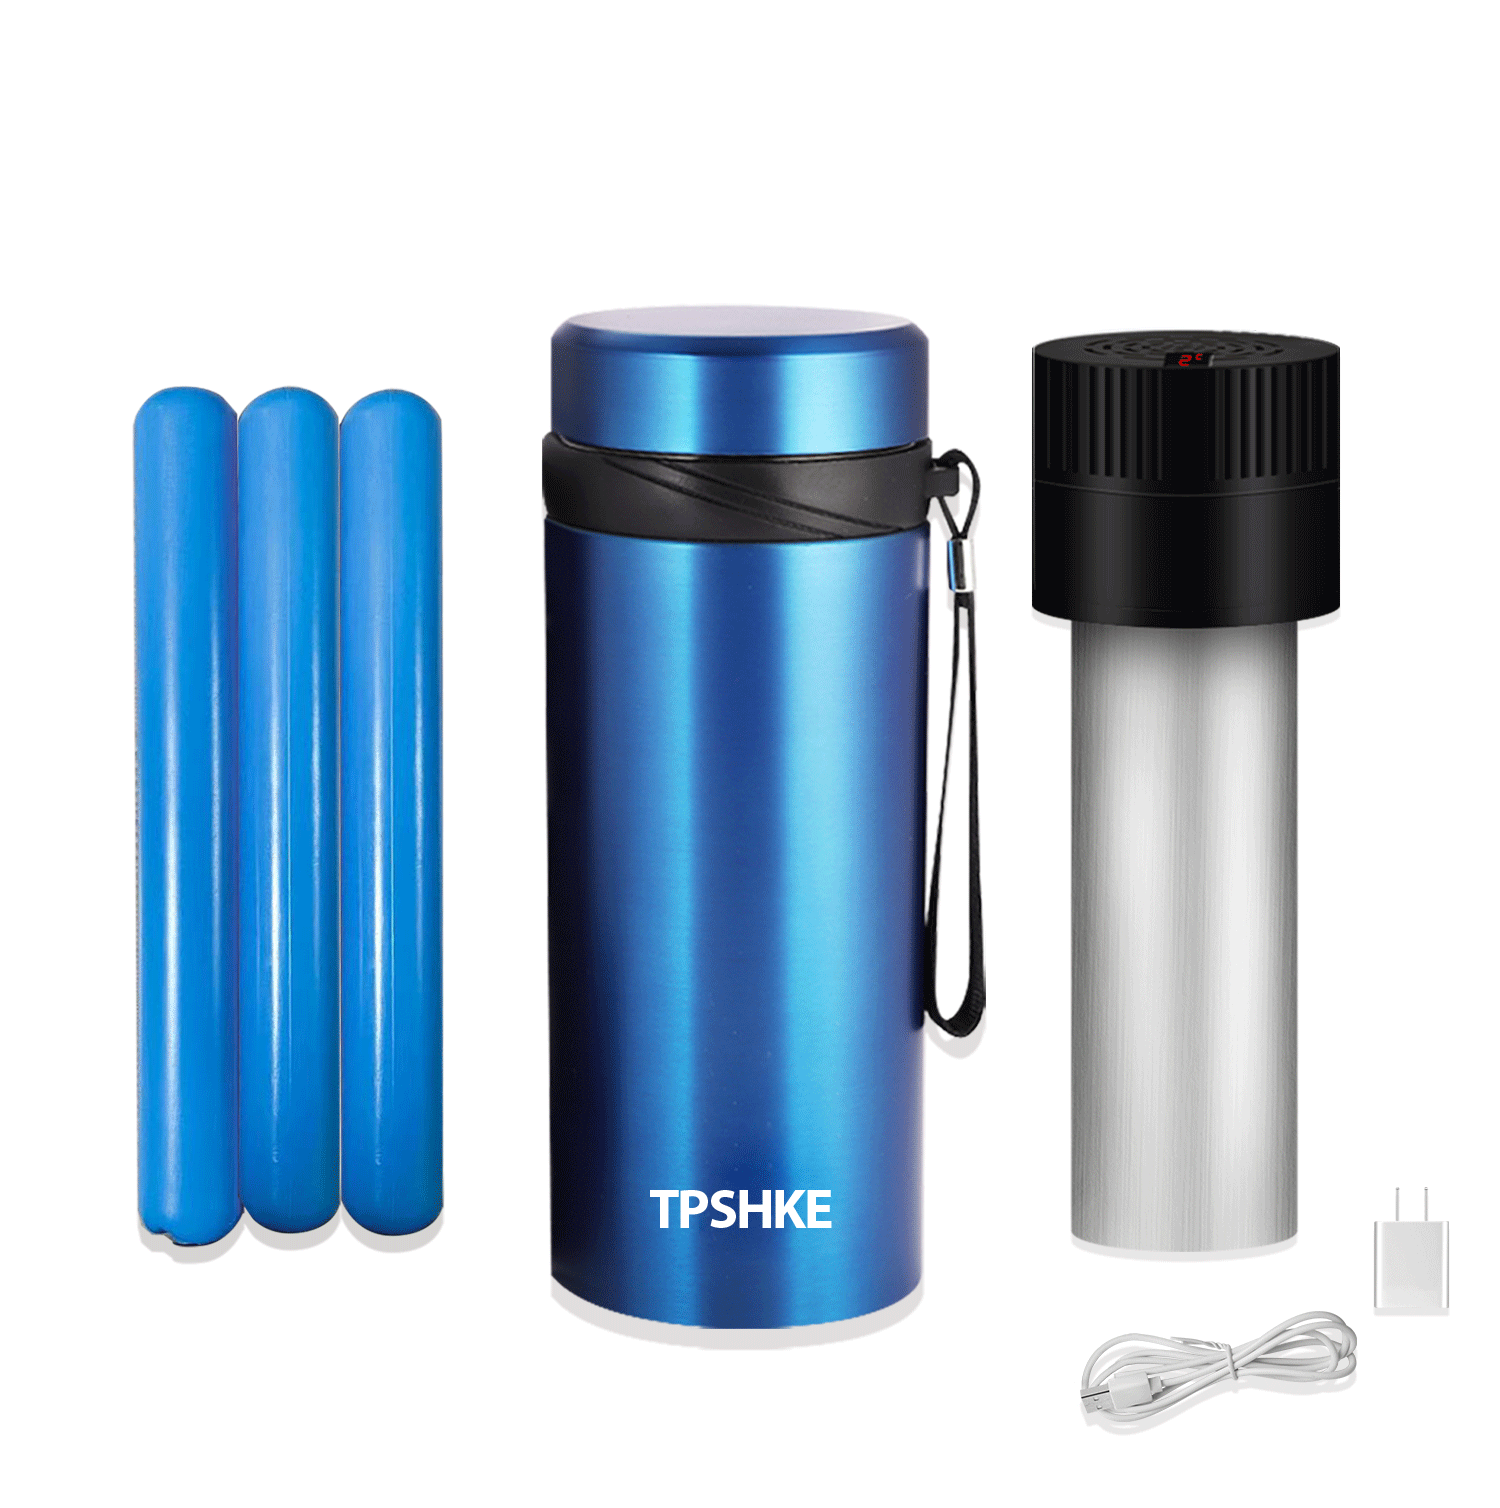 Portable Travel Medicine Cooler Cup Temperature Display + Usb Charger